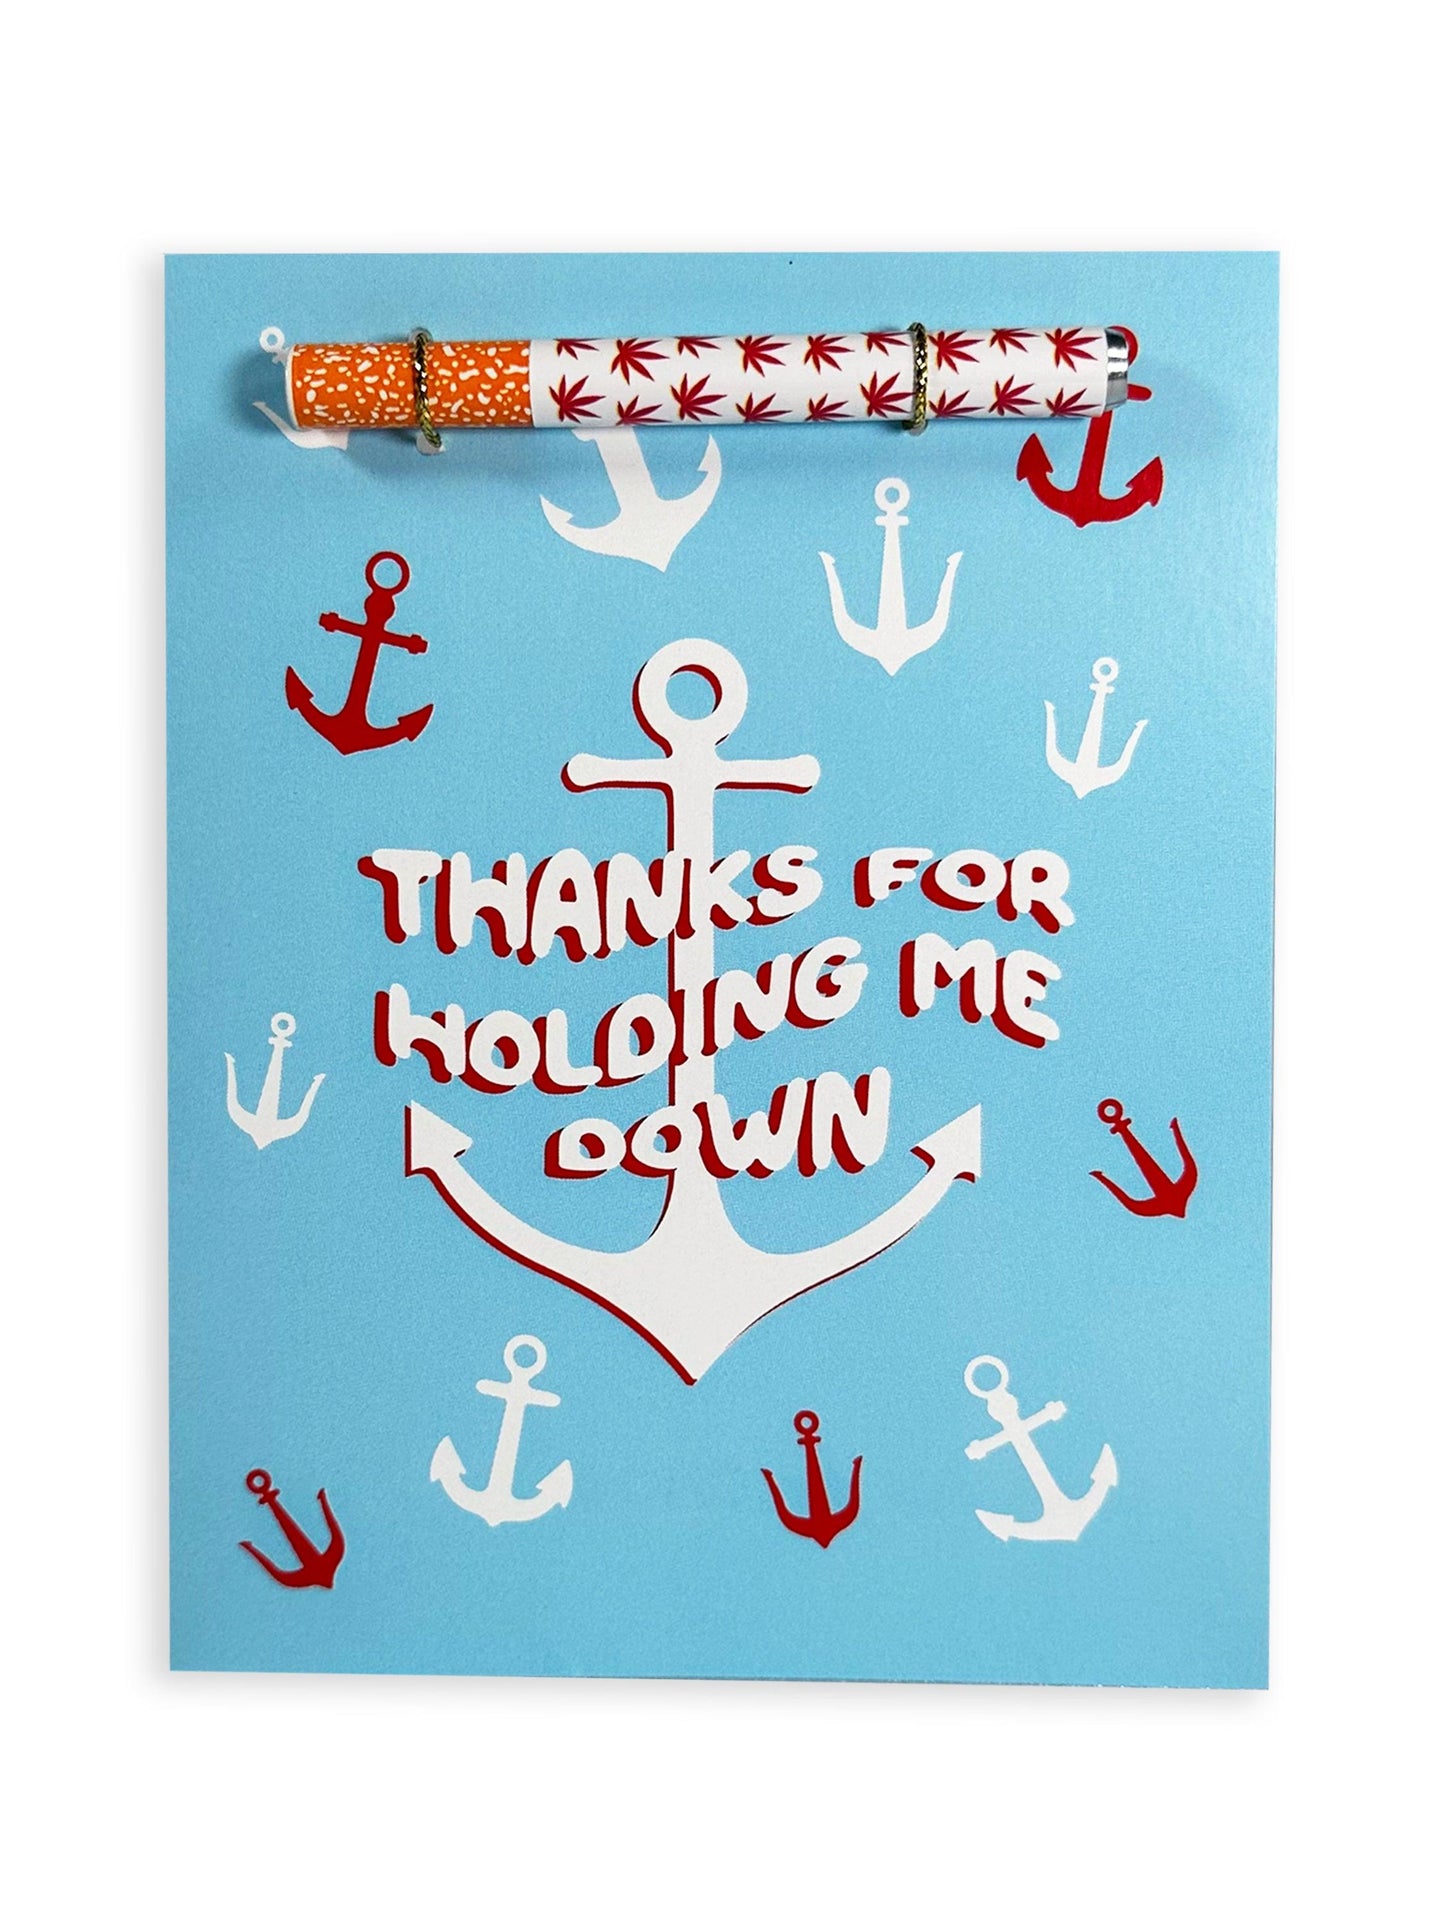 Thanks For Holding Me Down Greeting Card ⚓️ - KushKards